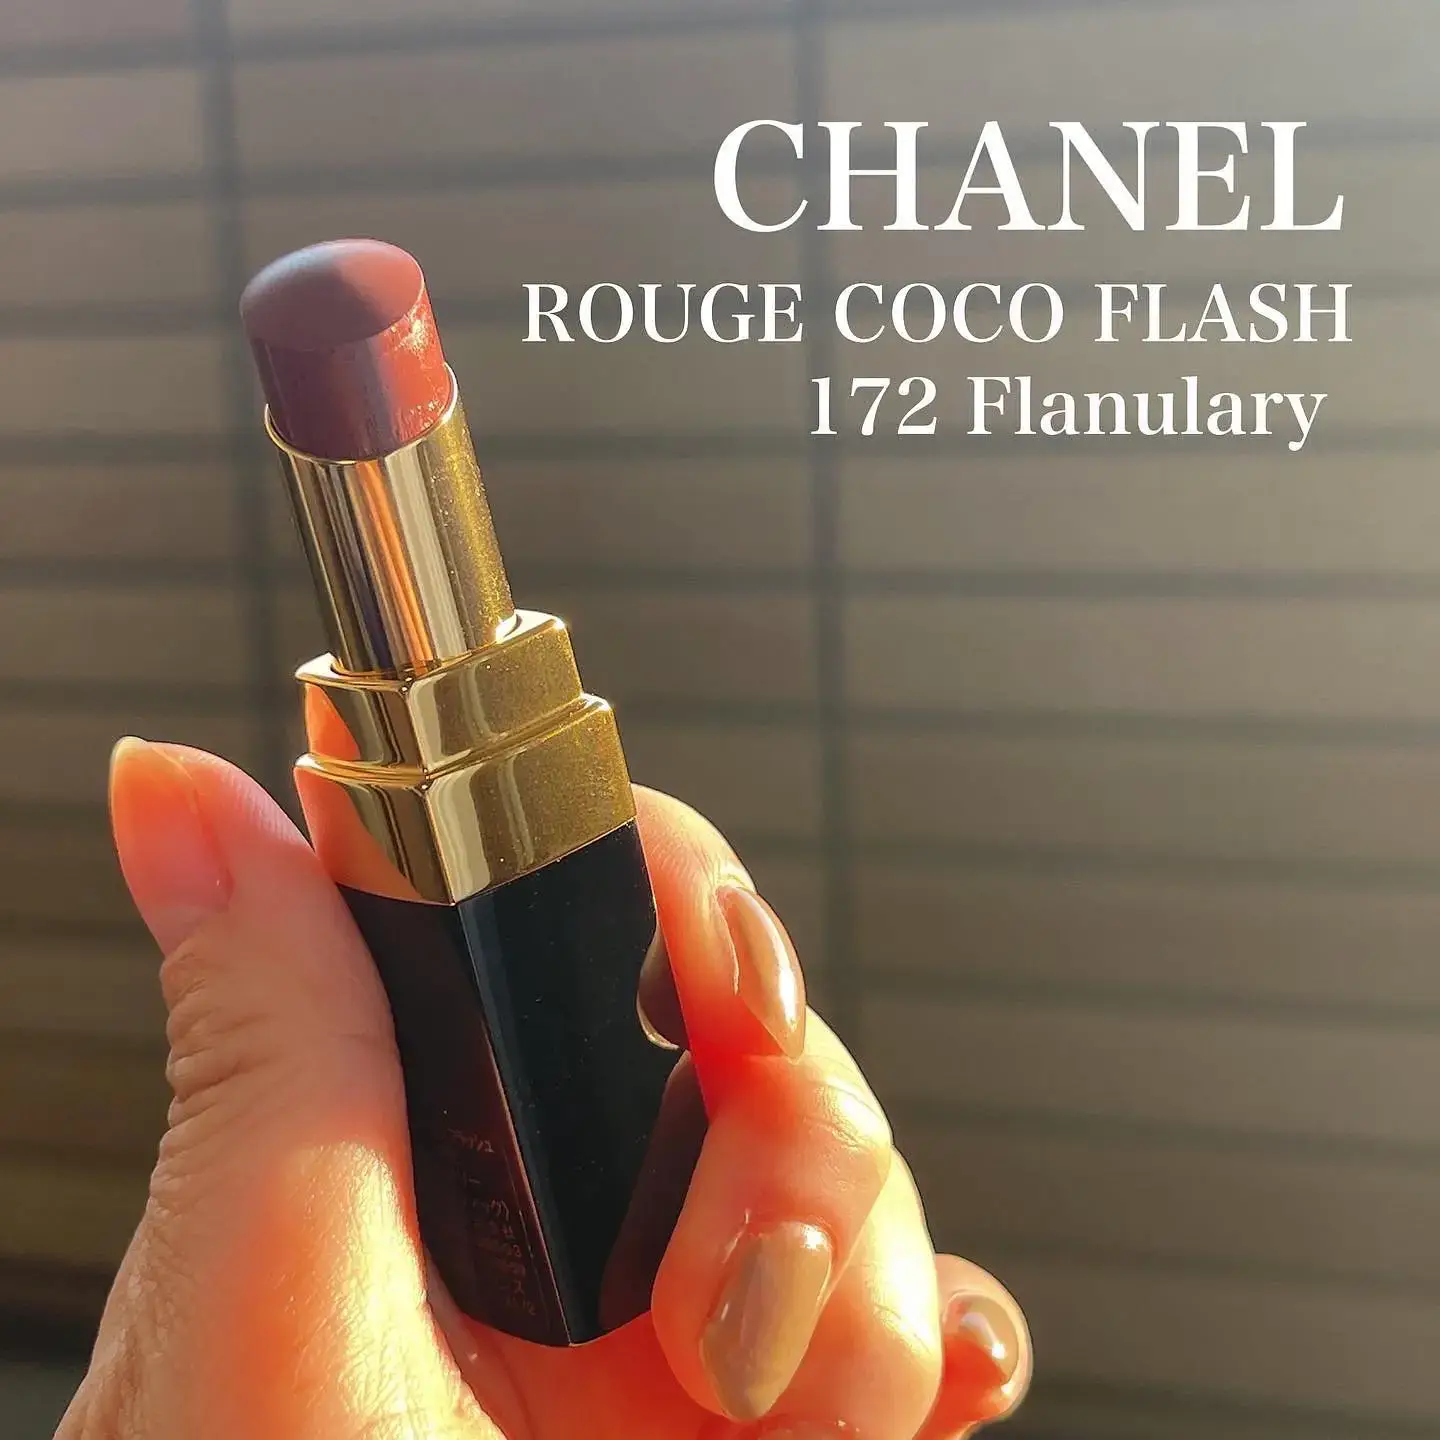 Chanel Rouge Allure Luminous Lip Colour Nudes Fall/Winter 2022 - 5 Shades  Lip & Hand Swatches 